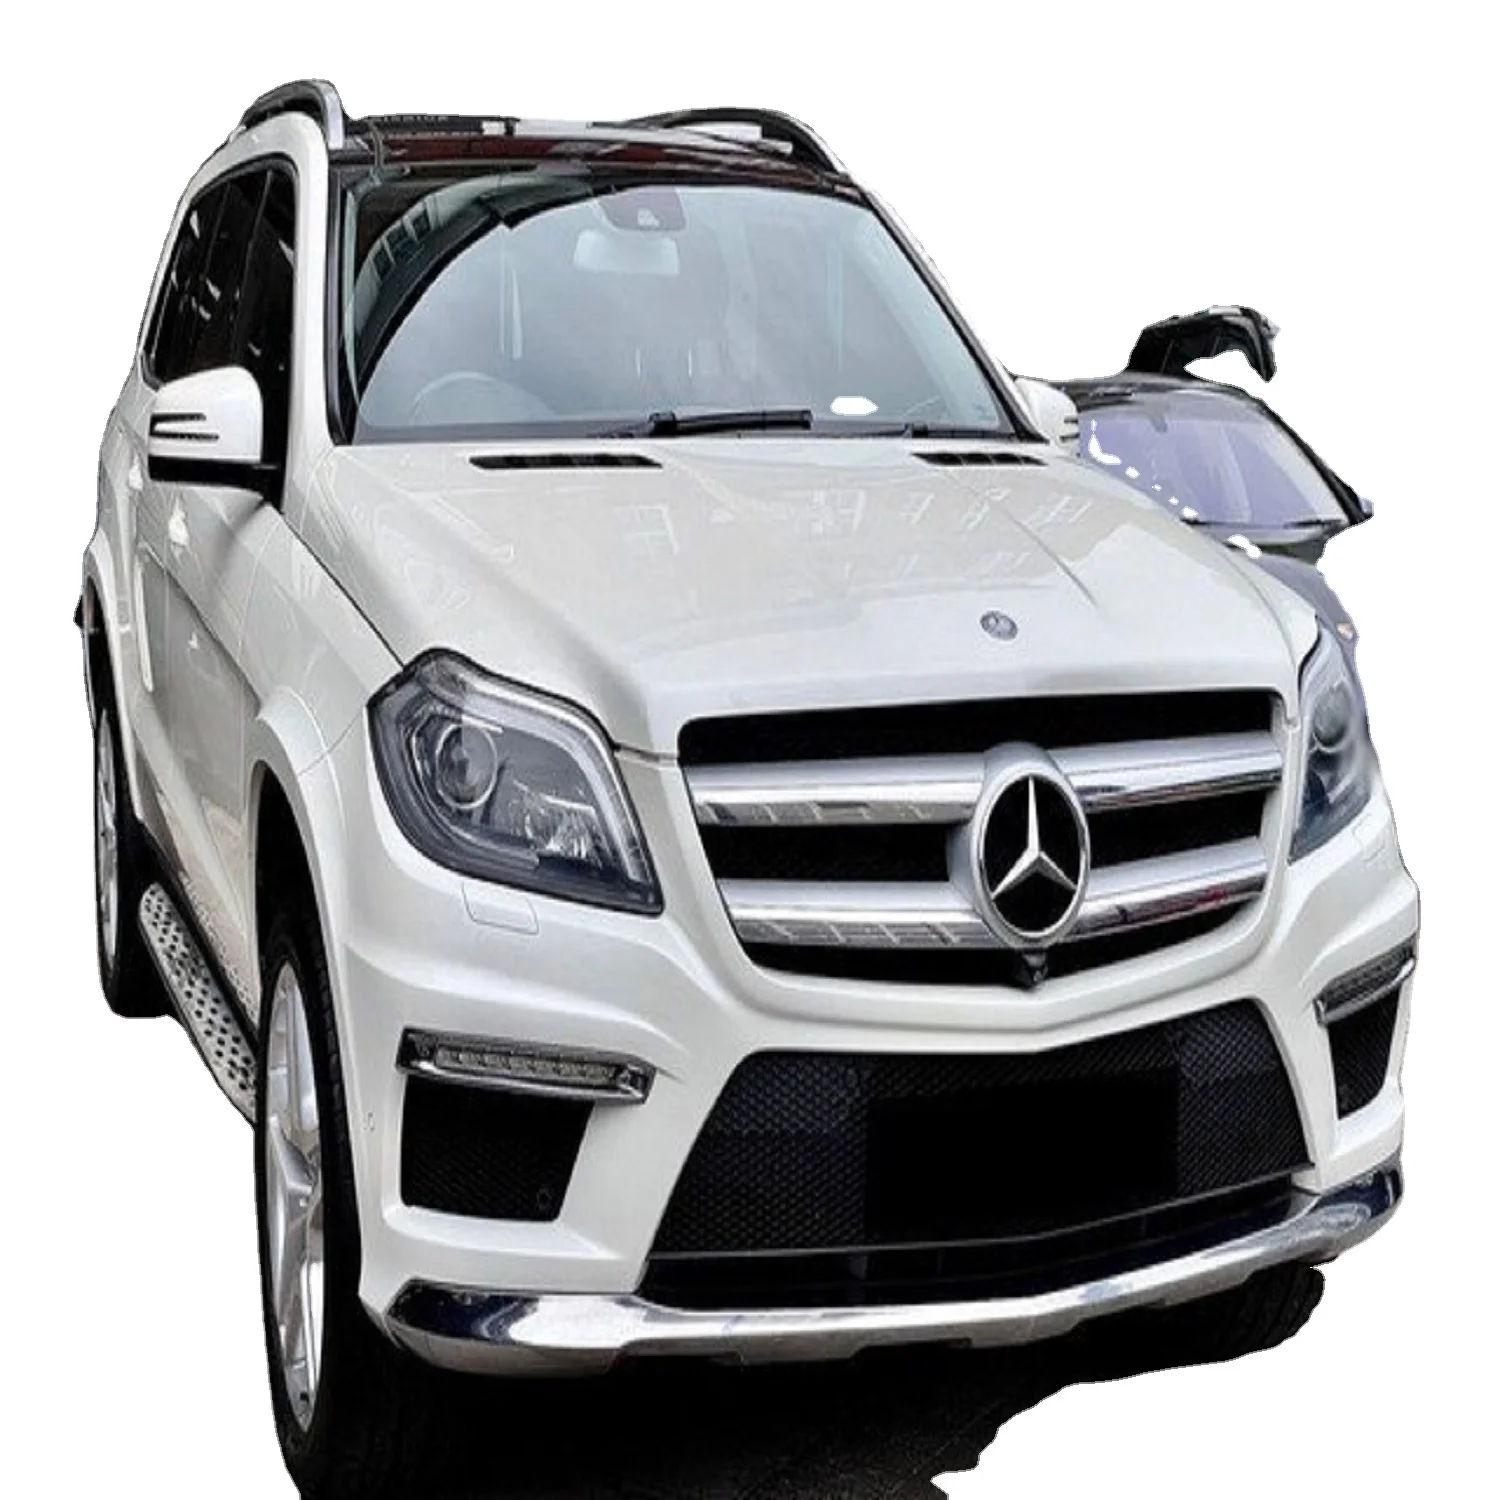 USED 2013 MERCEDES BENZ GL CLASS AUTOMATIC CARS FOR SALE (11000001444363)